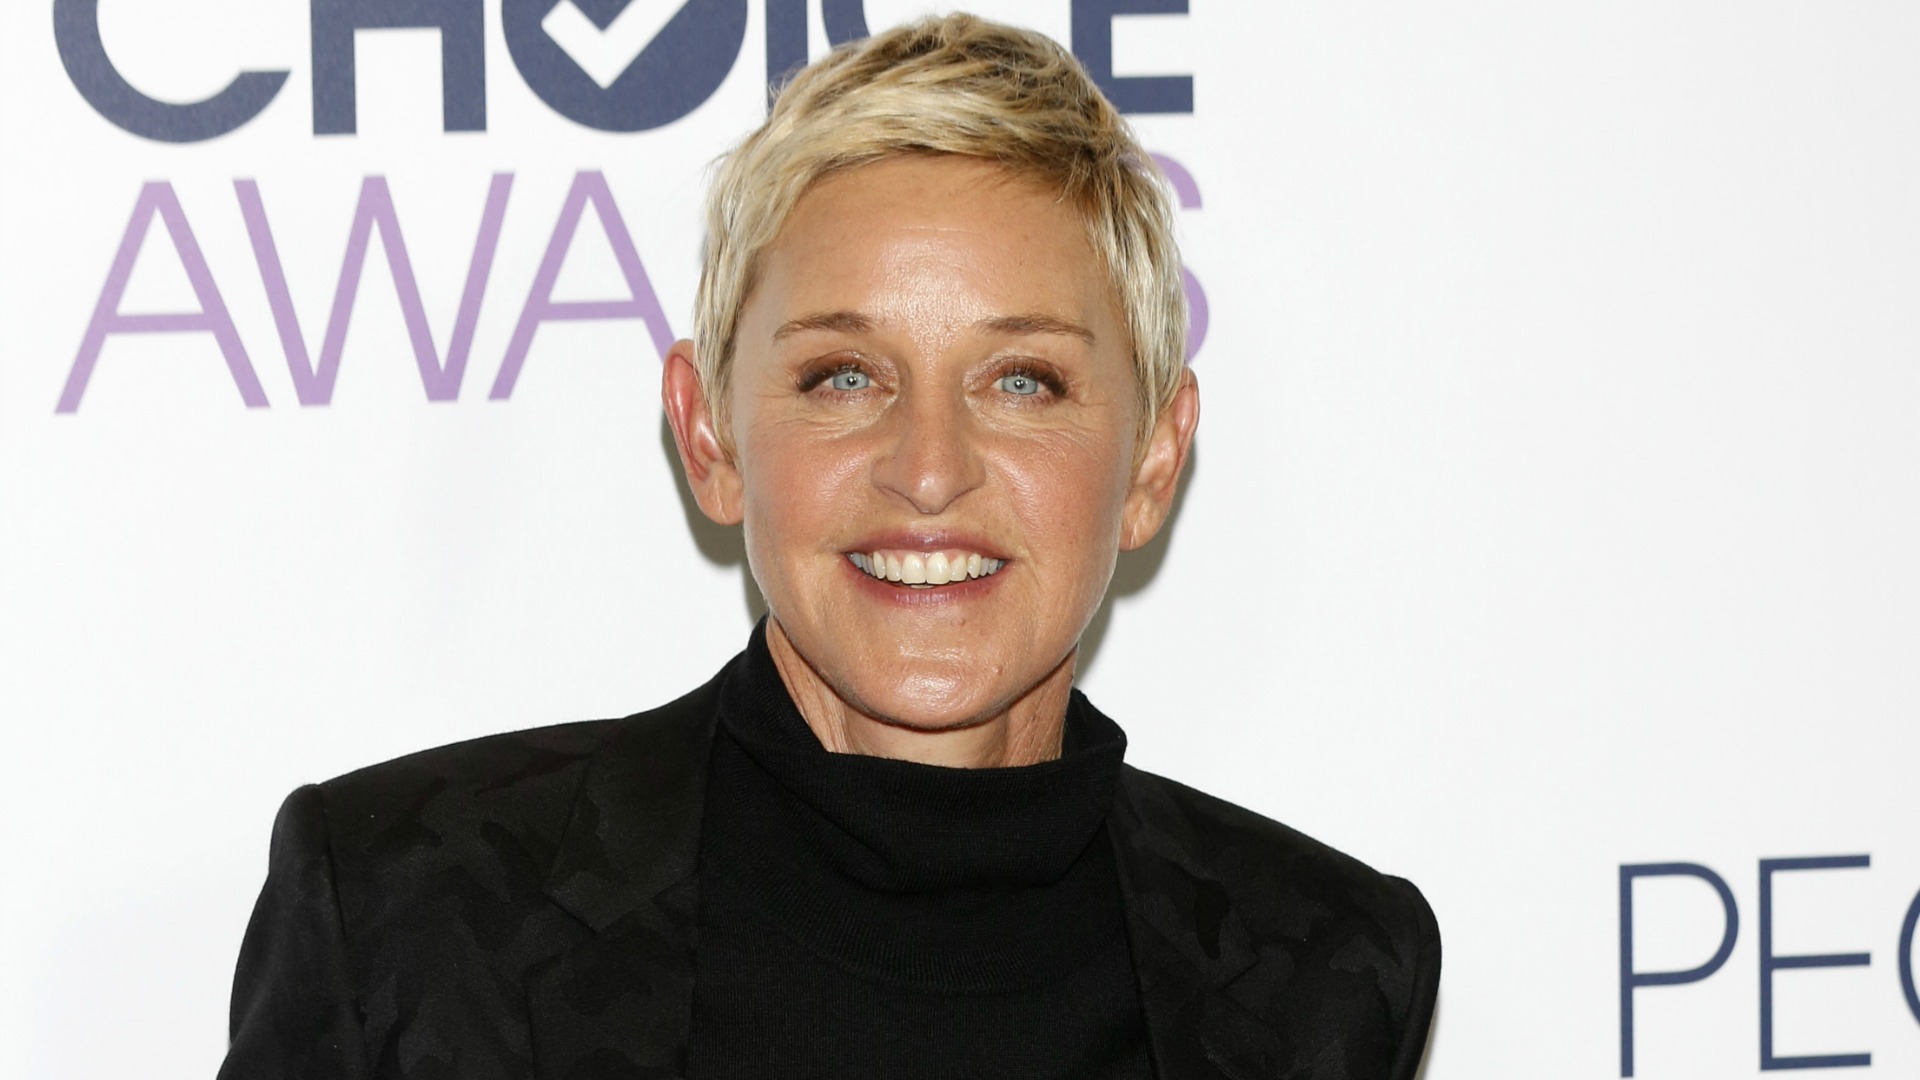 Ellen DeGeneres attending the People's Choice Awards 2016 held at Microsoft Theater on January 6, 2016 in Los Angeles, California Featuring: Ellen DeGeneres Where: Los Angeles, California, United States When: 06 Jan 2016 Credit: Dave Bedrosian/Future Image/WENN.com **Not available for publication in Germany, Poland, Russia, Hungary, Slovenia, Czech Republic, Serbia, Croatia, Slovakia**